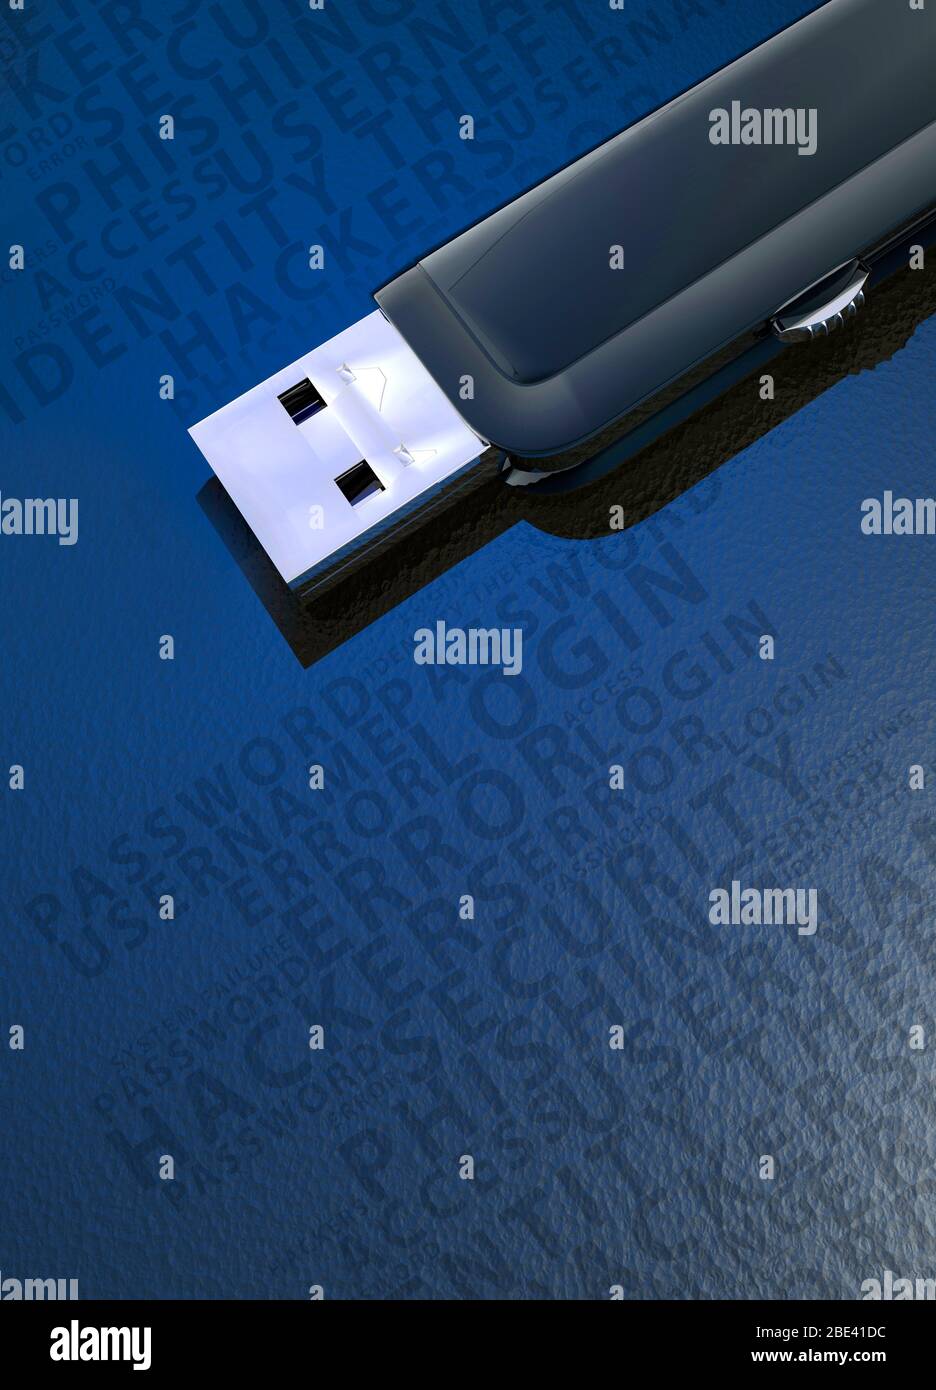 USB (Universal Serial Bus) connector against blue background, illustration Stock Photo